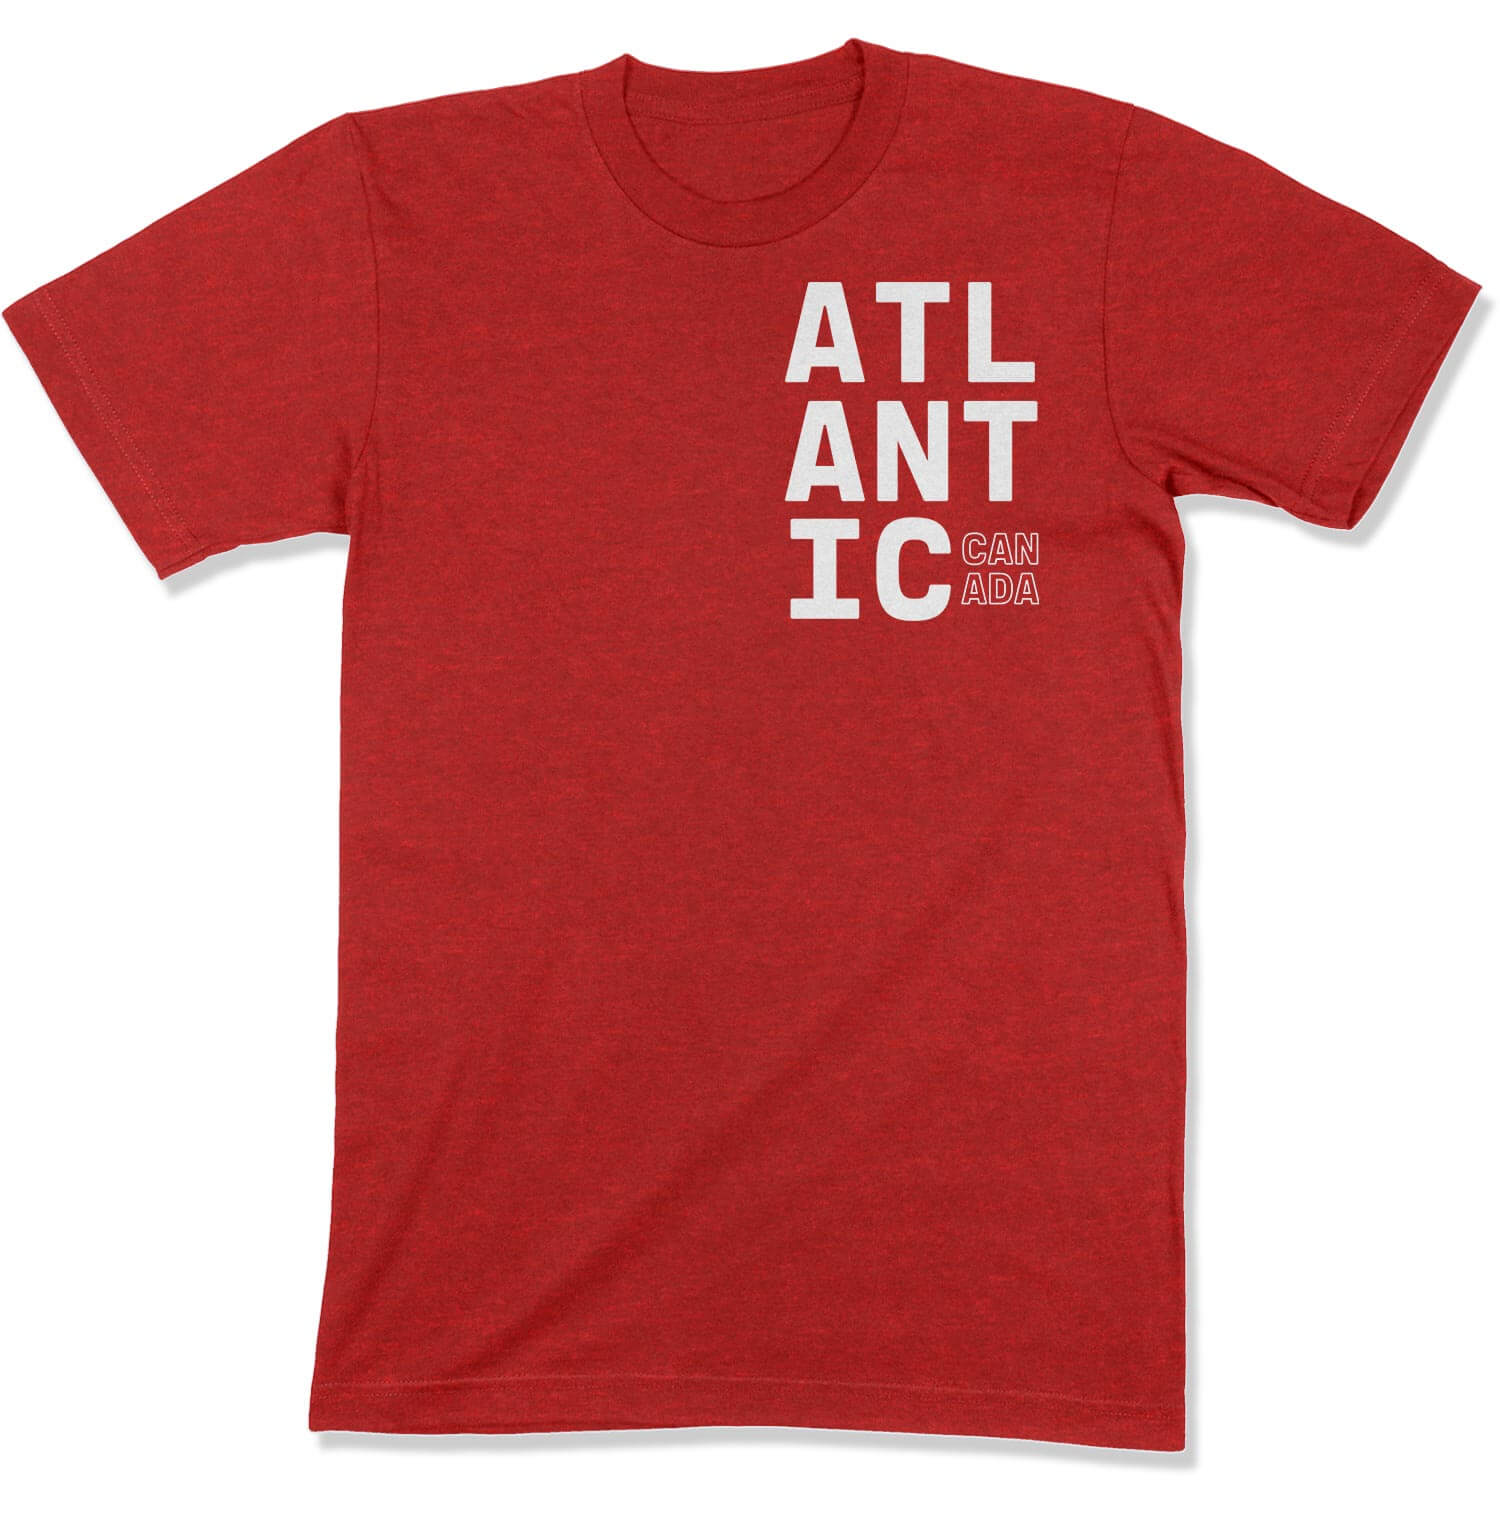 Atlantic Canada Unisex T-Shirt in Color: Heather Red - East Coast AF Apparel